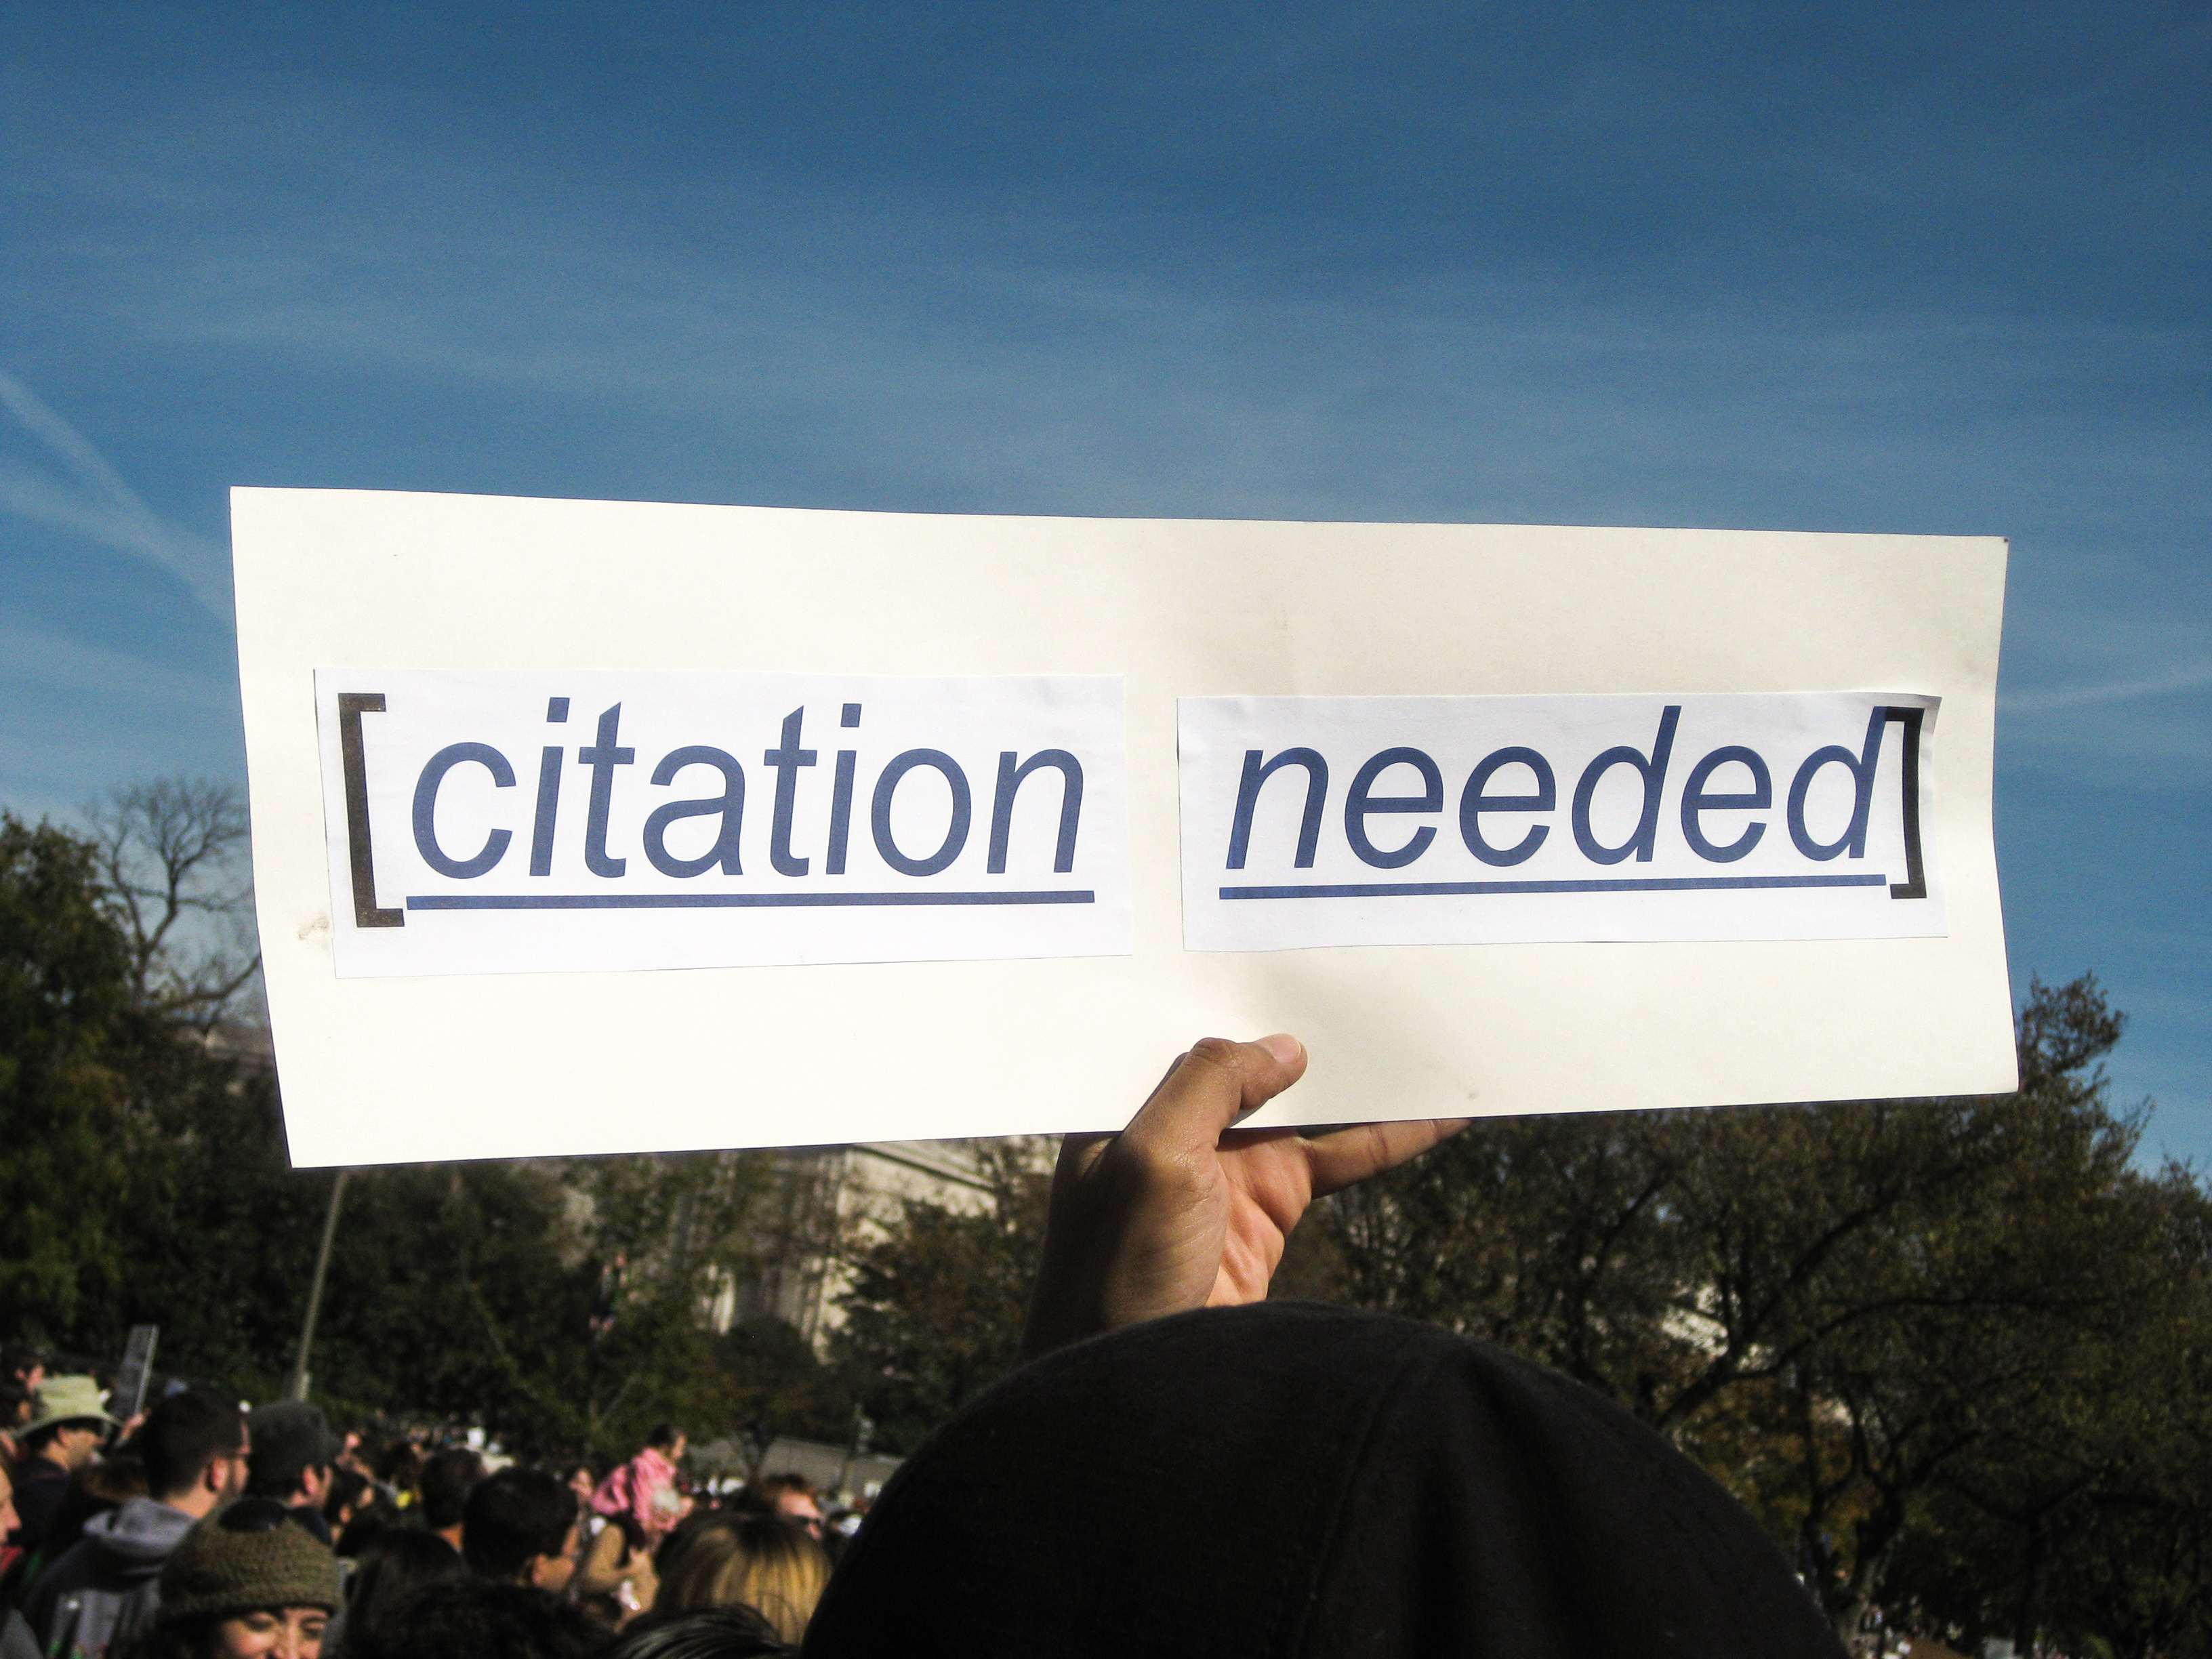 Image of a sign held up by a hand in the air that states in brackets citation needed. In the background is a large number of people with a blue sky.